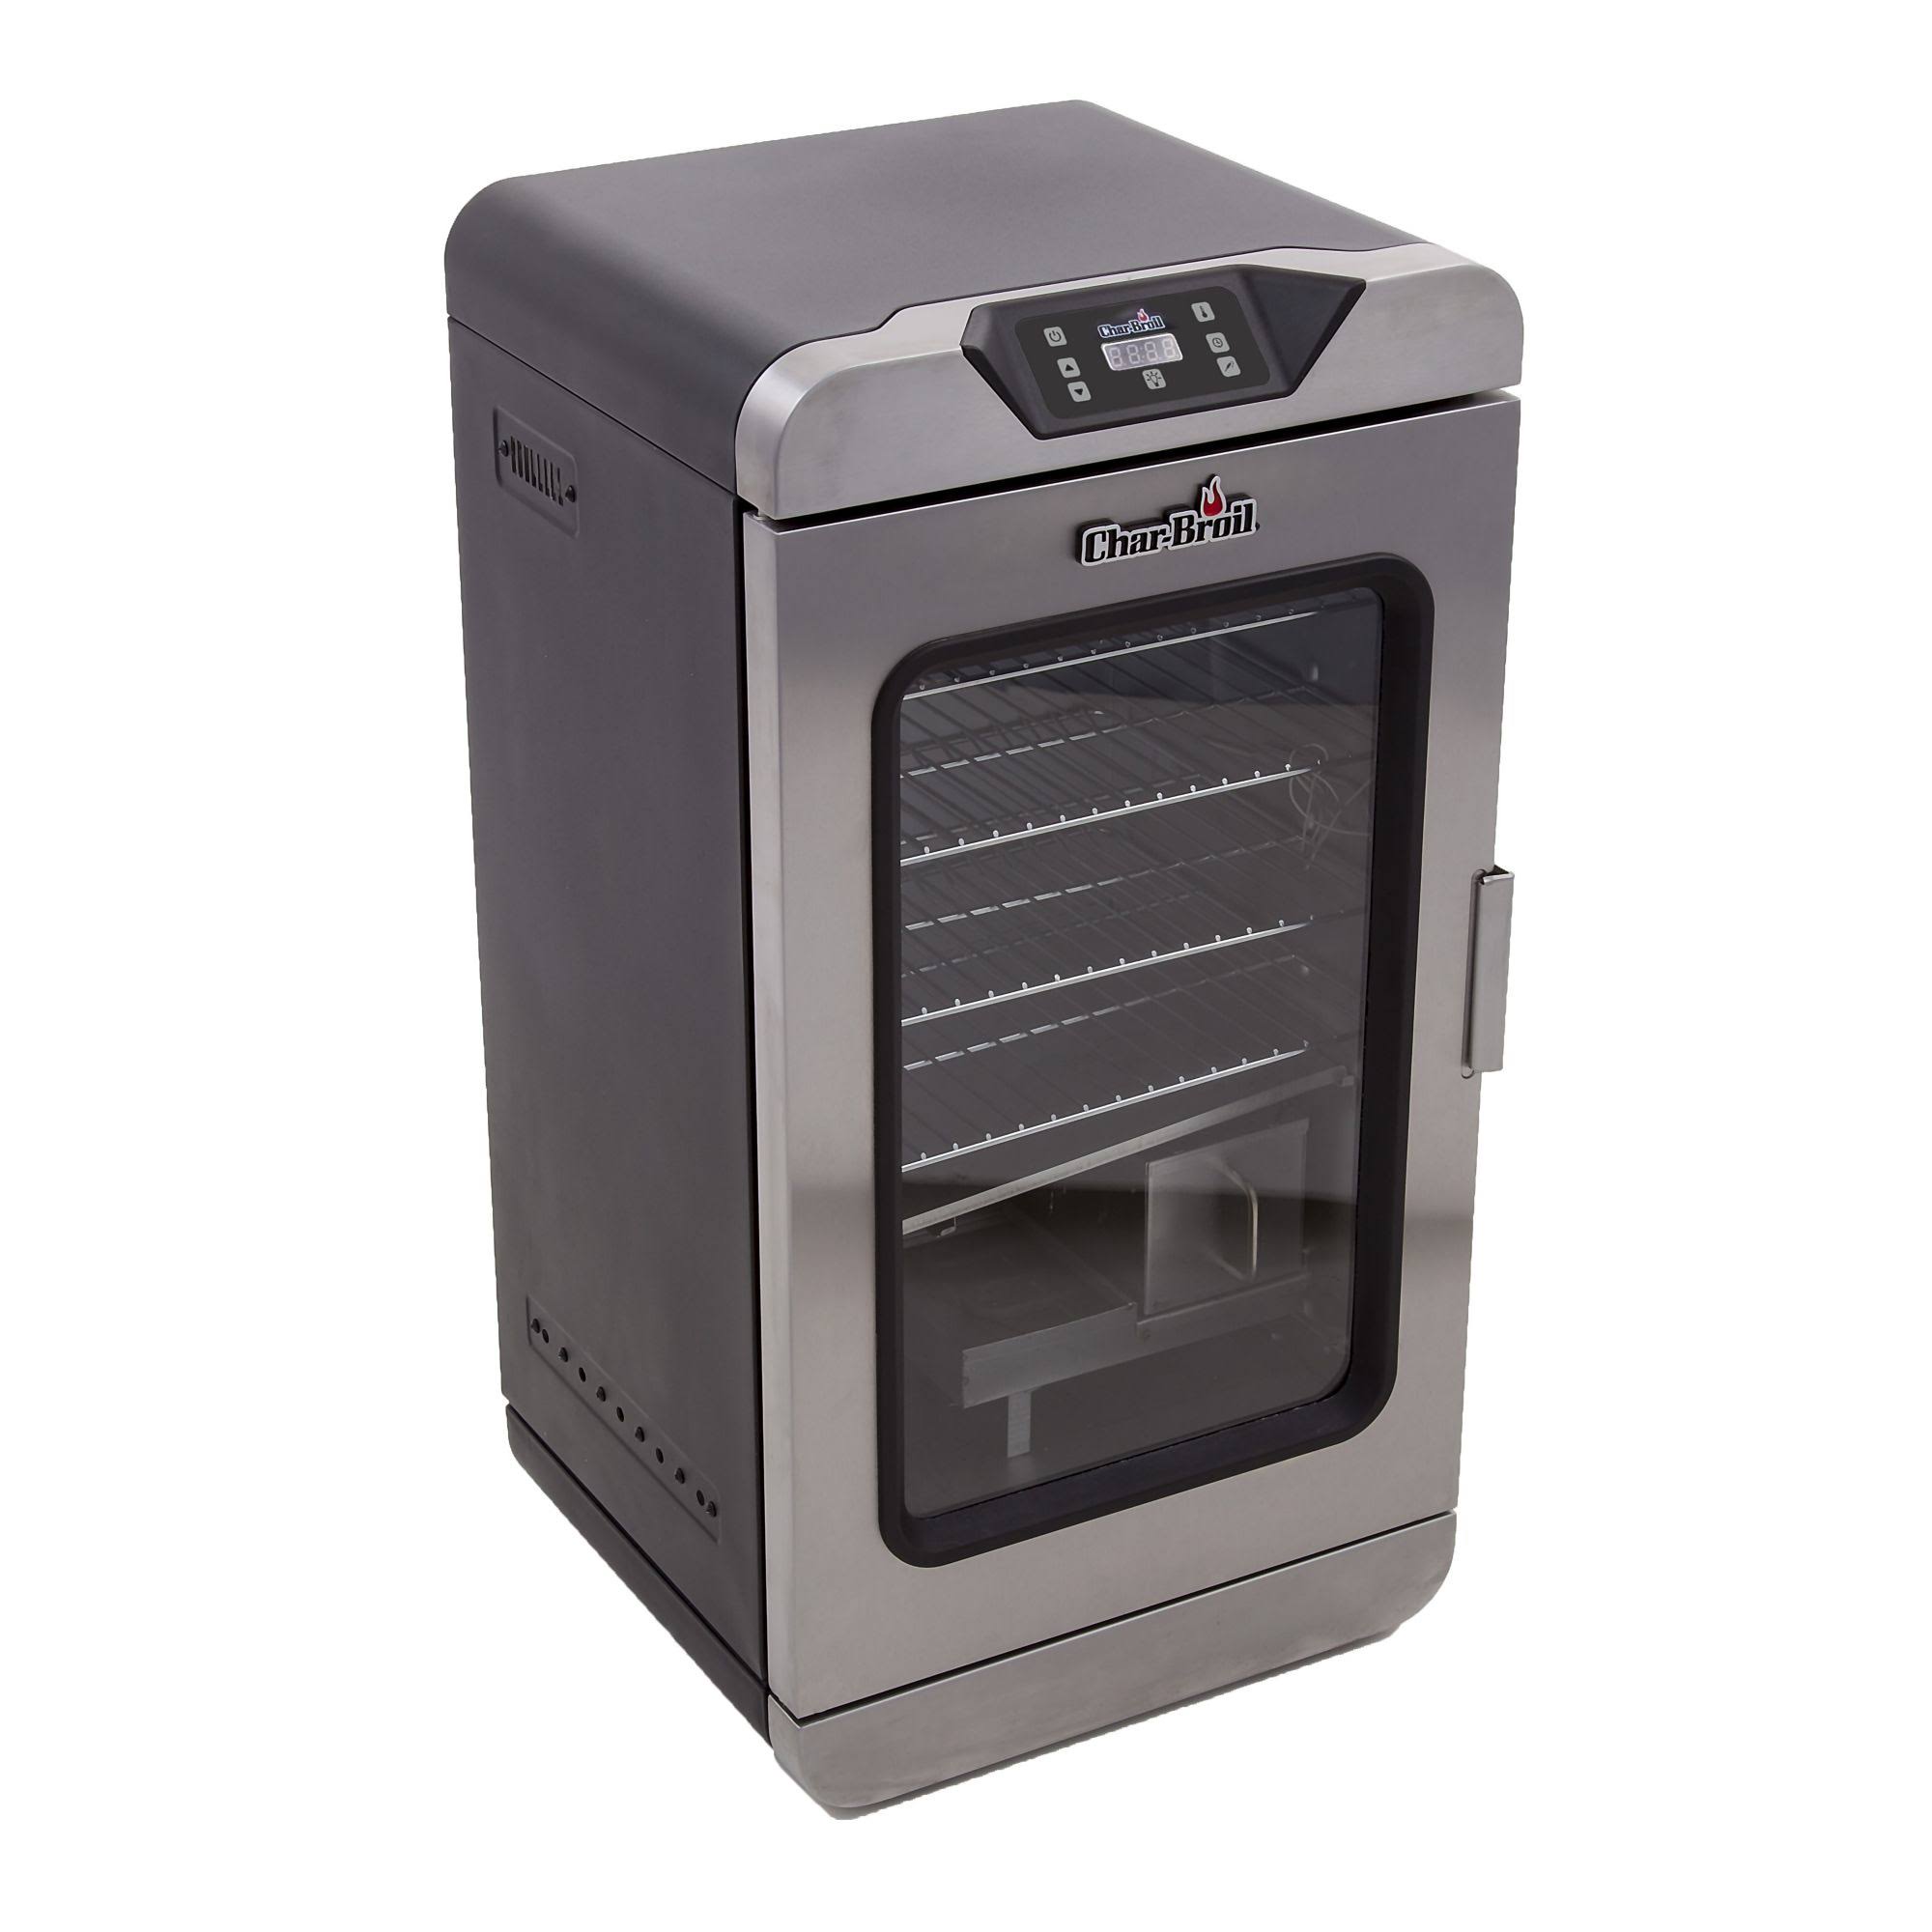 Char Broil Deluxe Digital Electric Smoker - 725 Square Inch